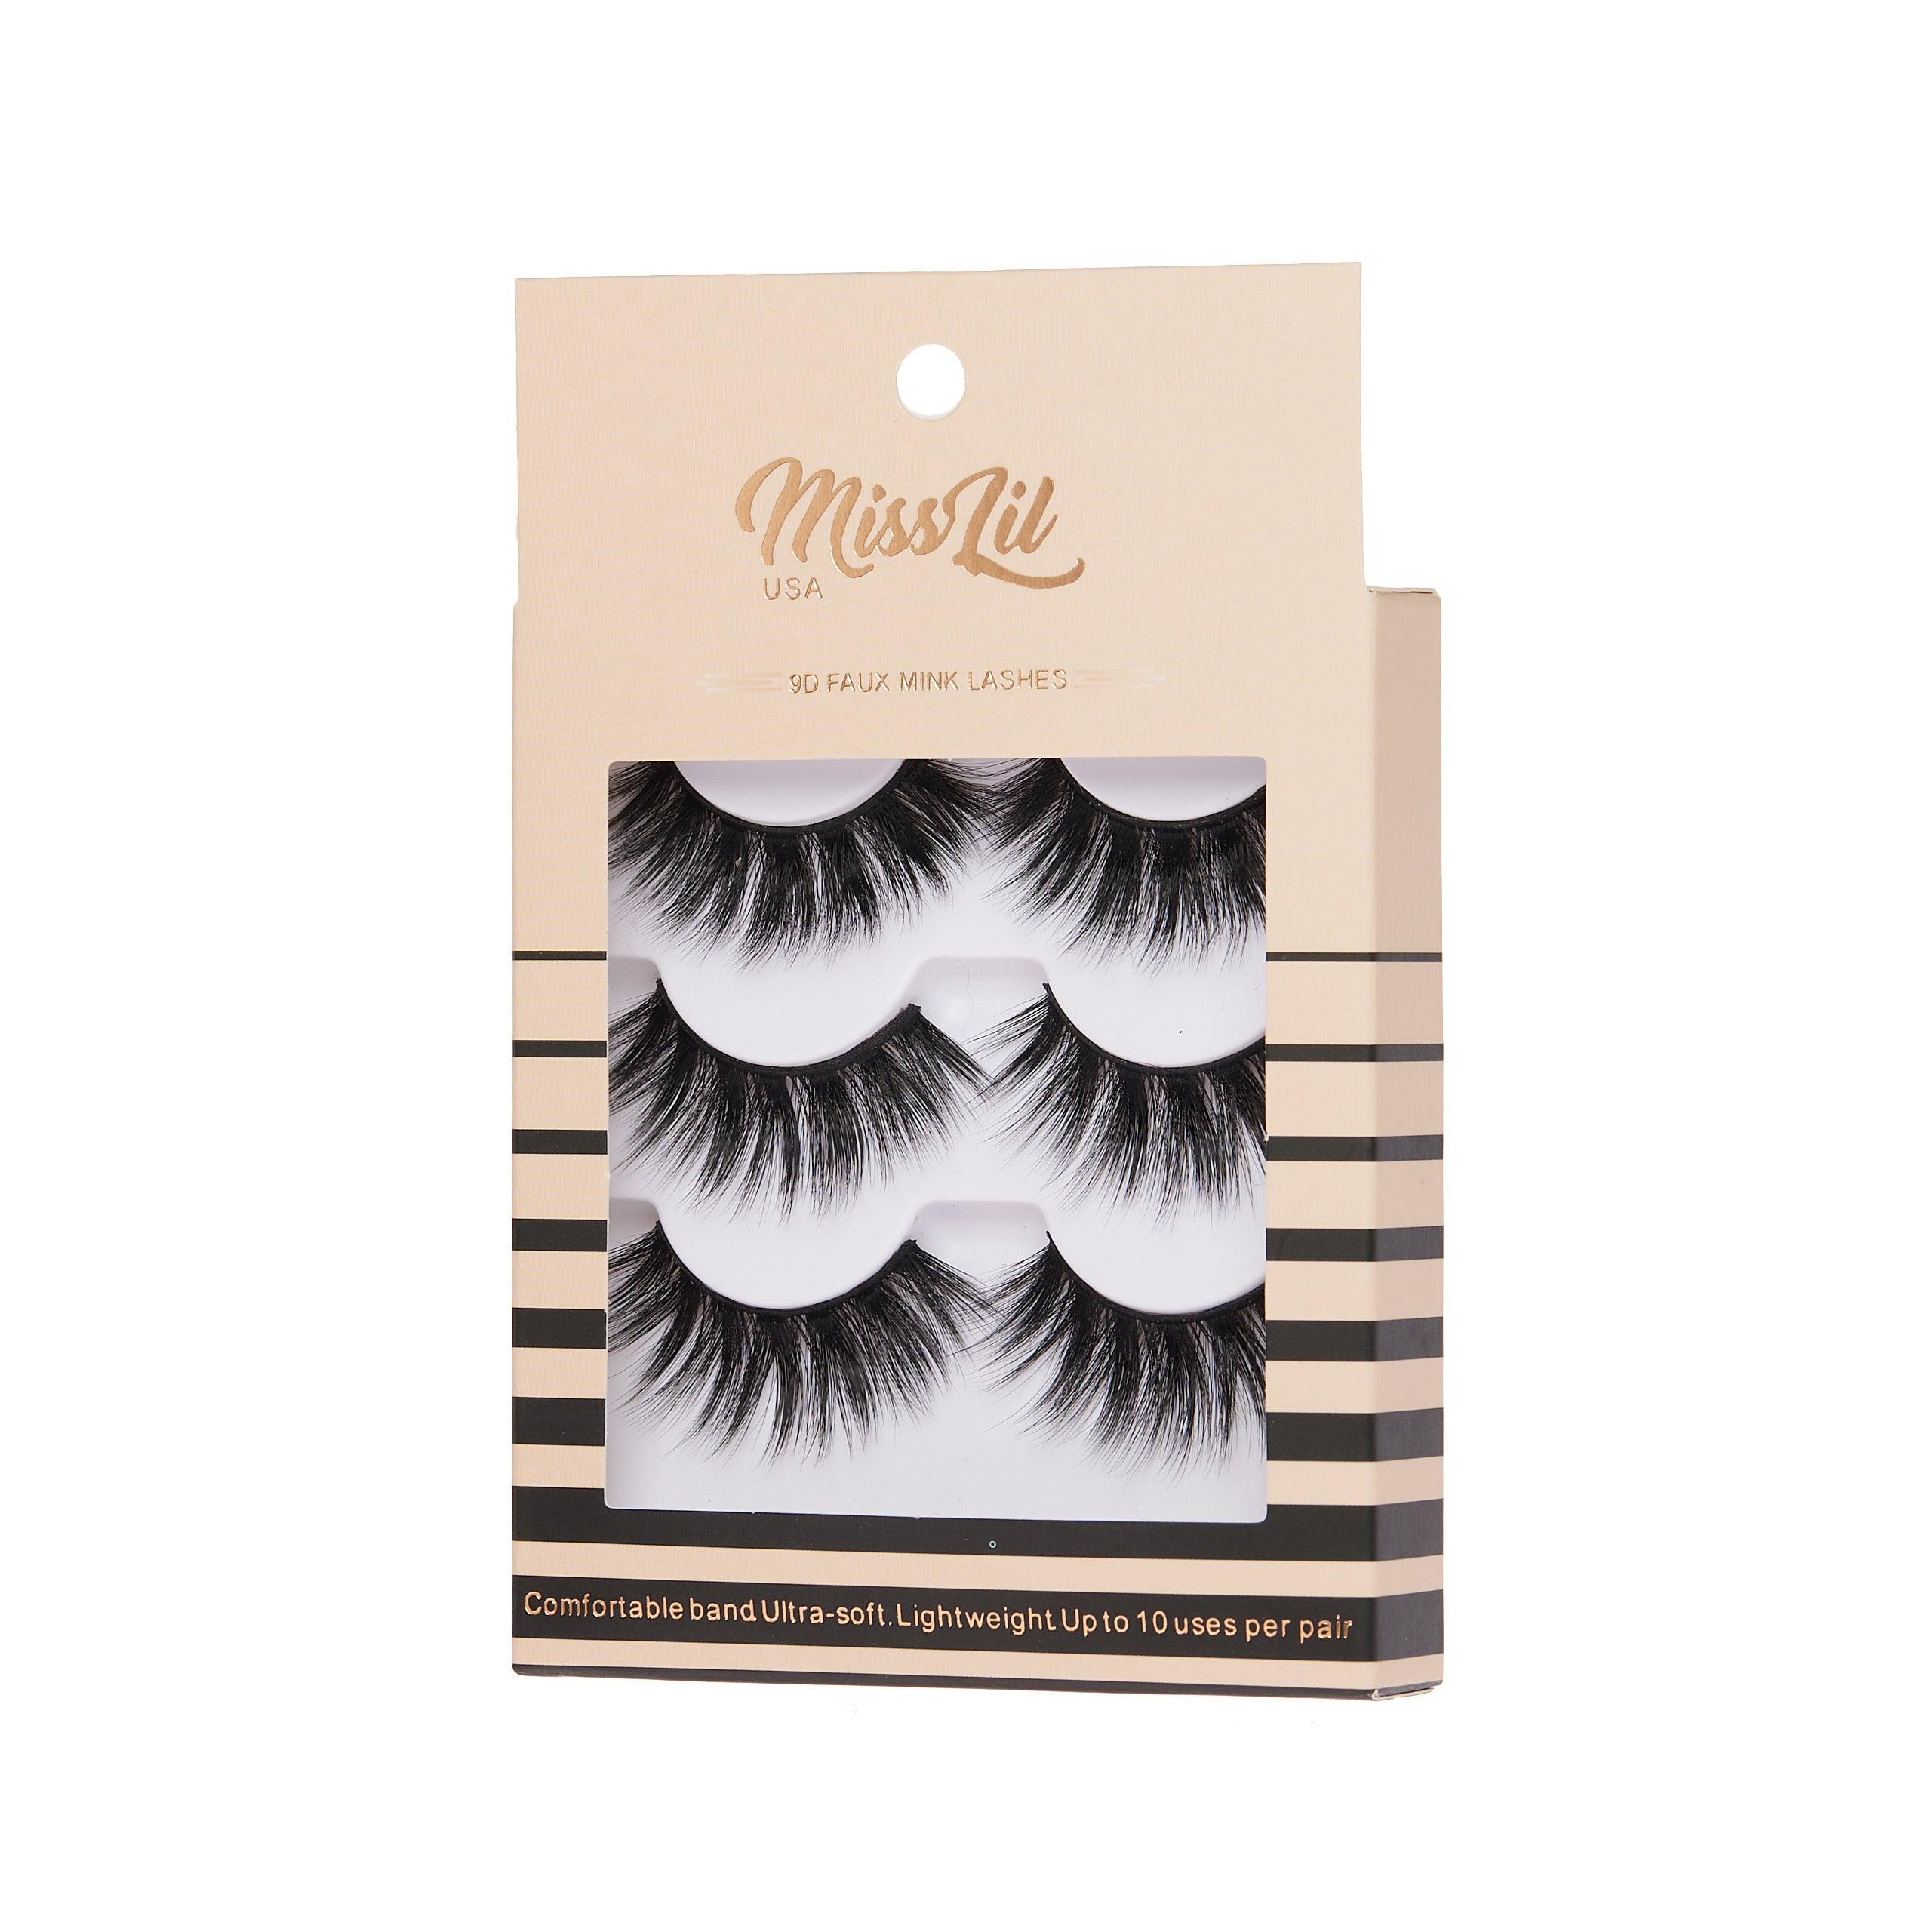 3-Pair Faux 9D Mink Eyelashes - Luxury Collection #15 - Pack of 12 - Miss Lil USA